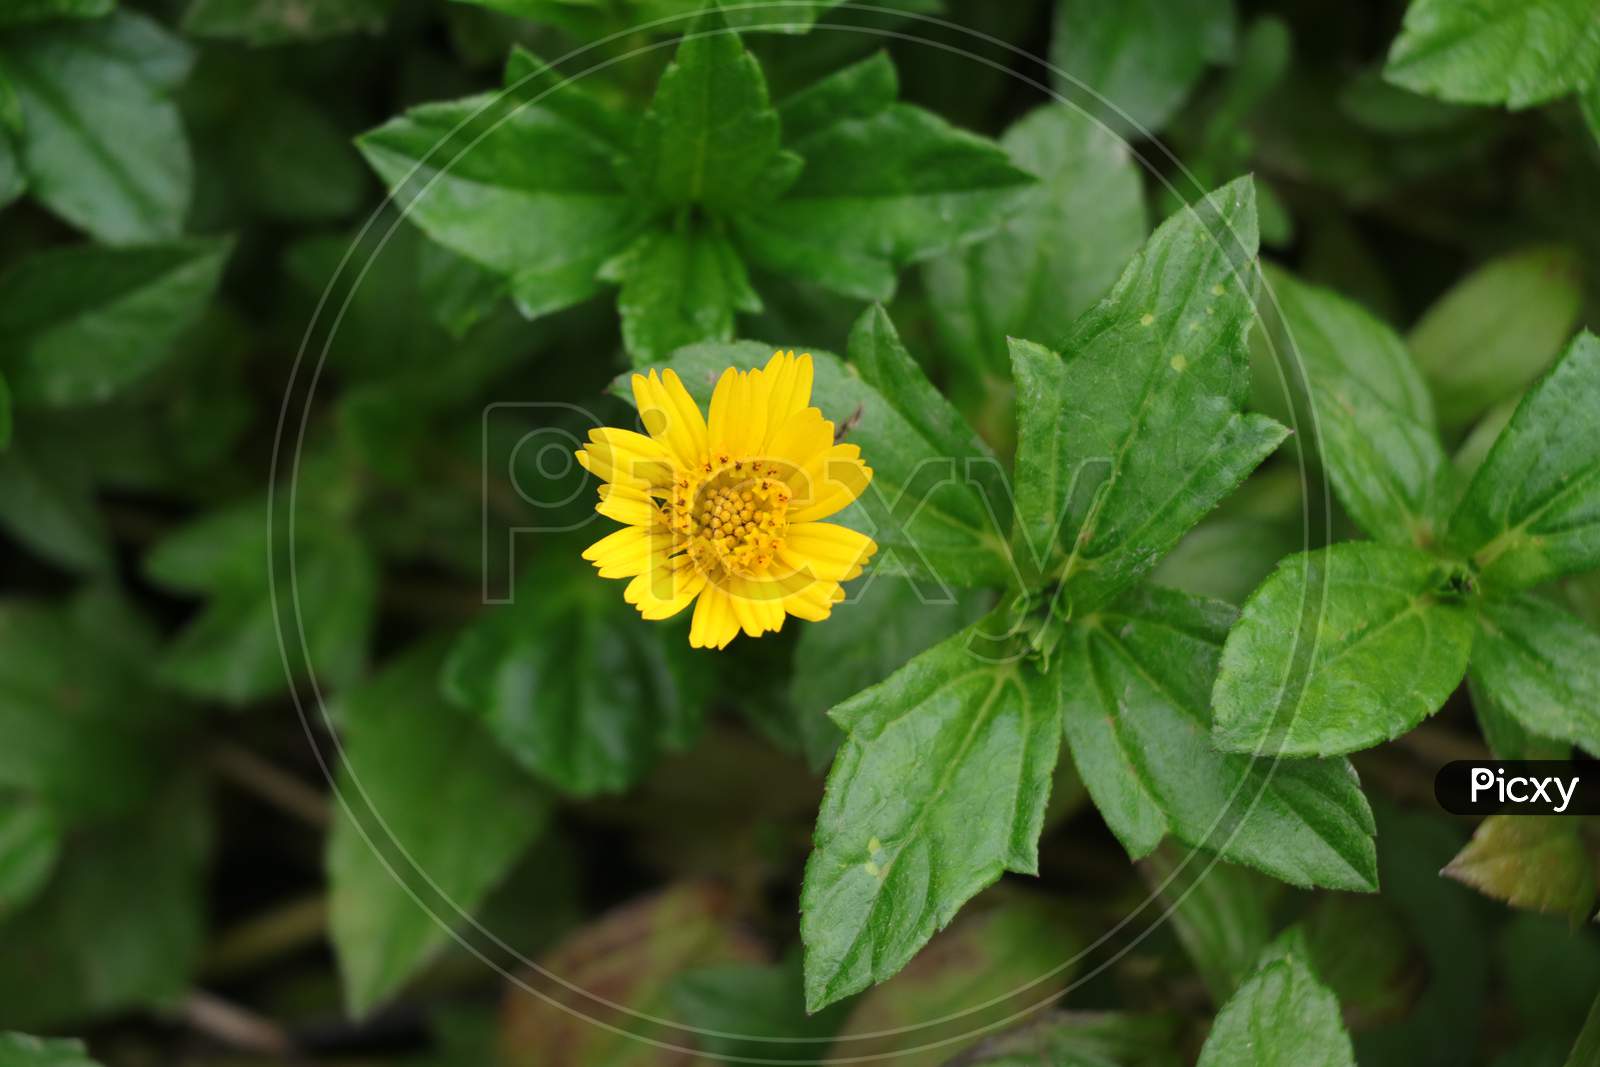 Yellow Calendula Flower With Soft Green Background And Leaves. Kinds Of Medicinal Herbs.